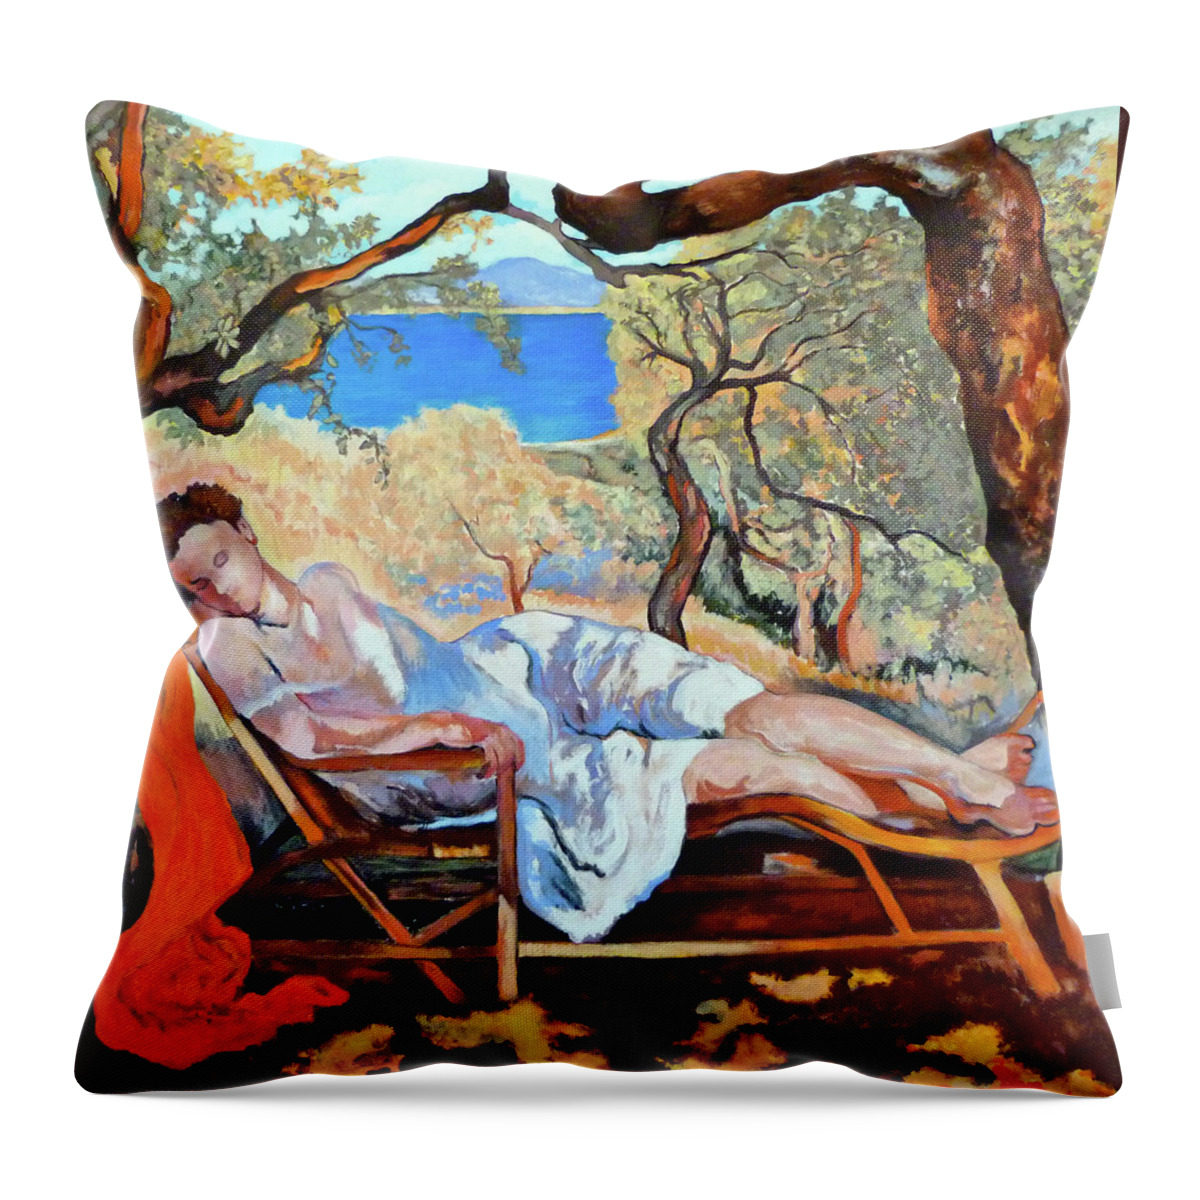 Lady Resting Throw Pillow featuring the painting At Peace by Tom Roderick